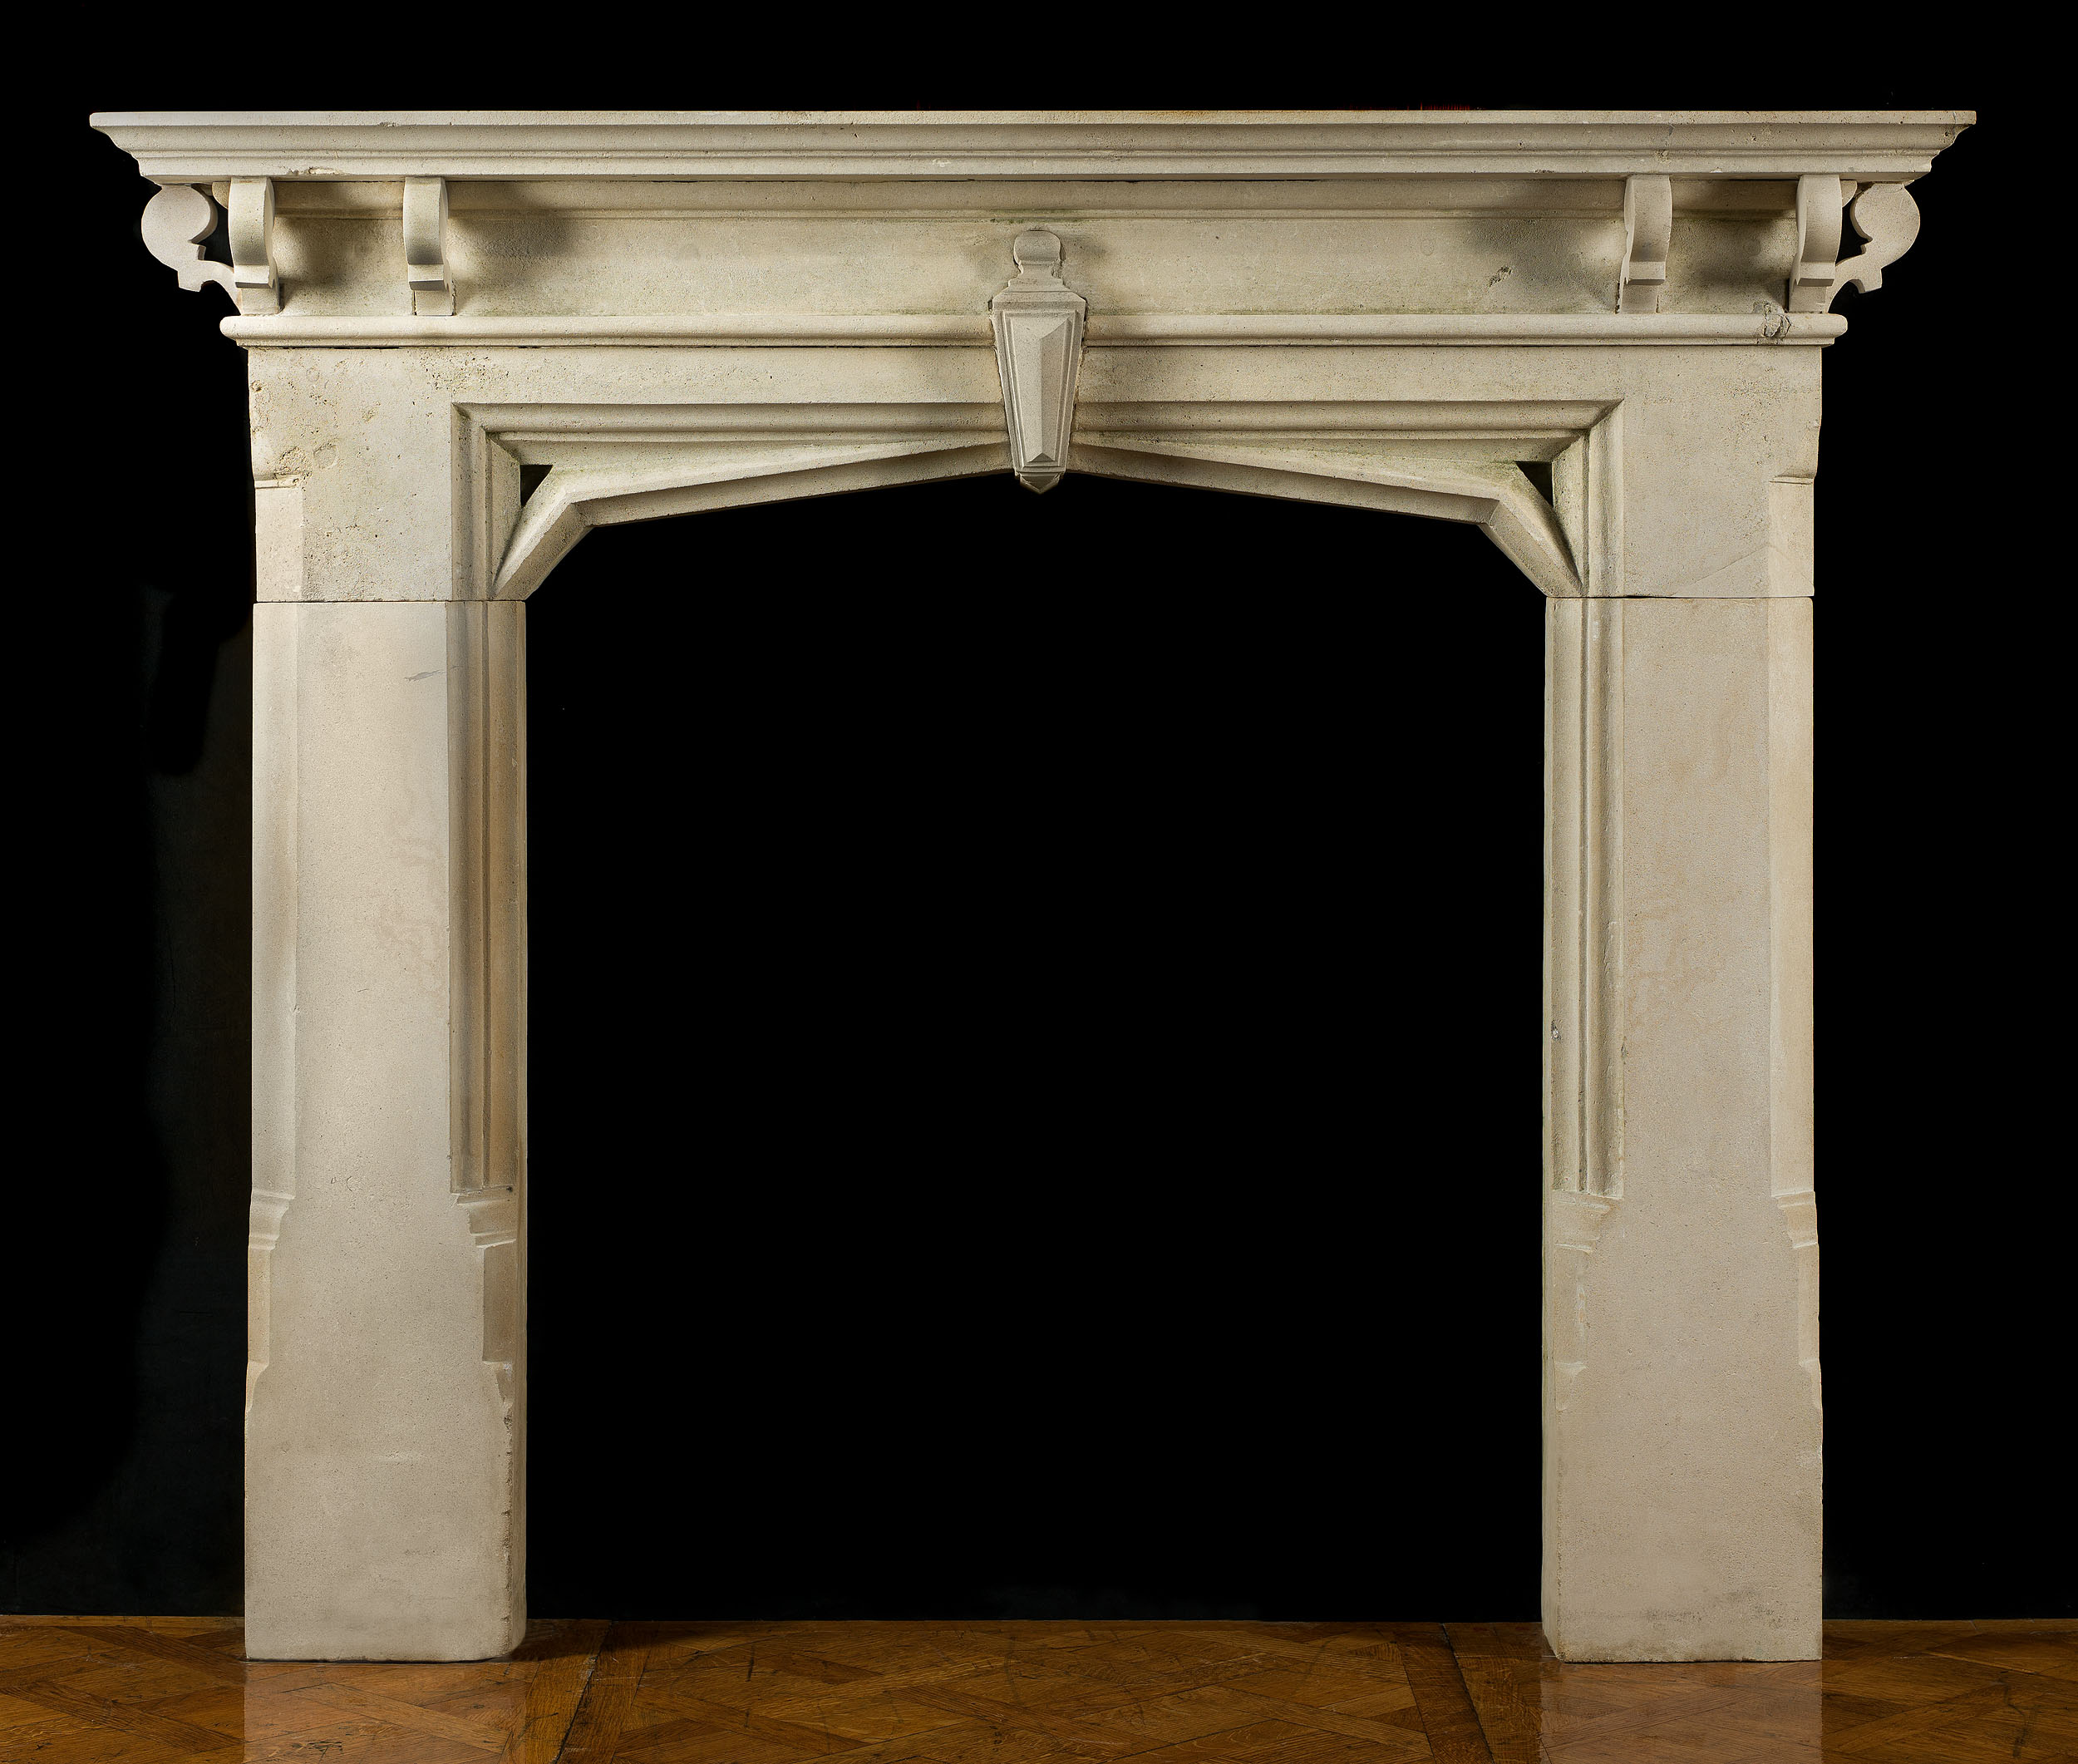 A Limestone Gothic Revival Antique Fireplace